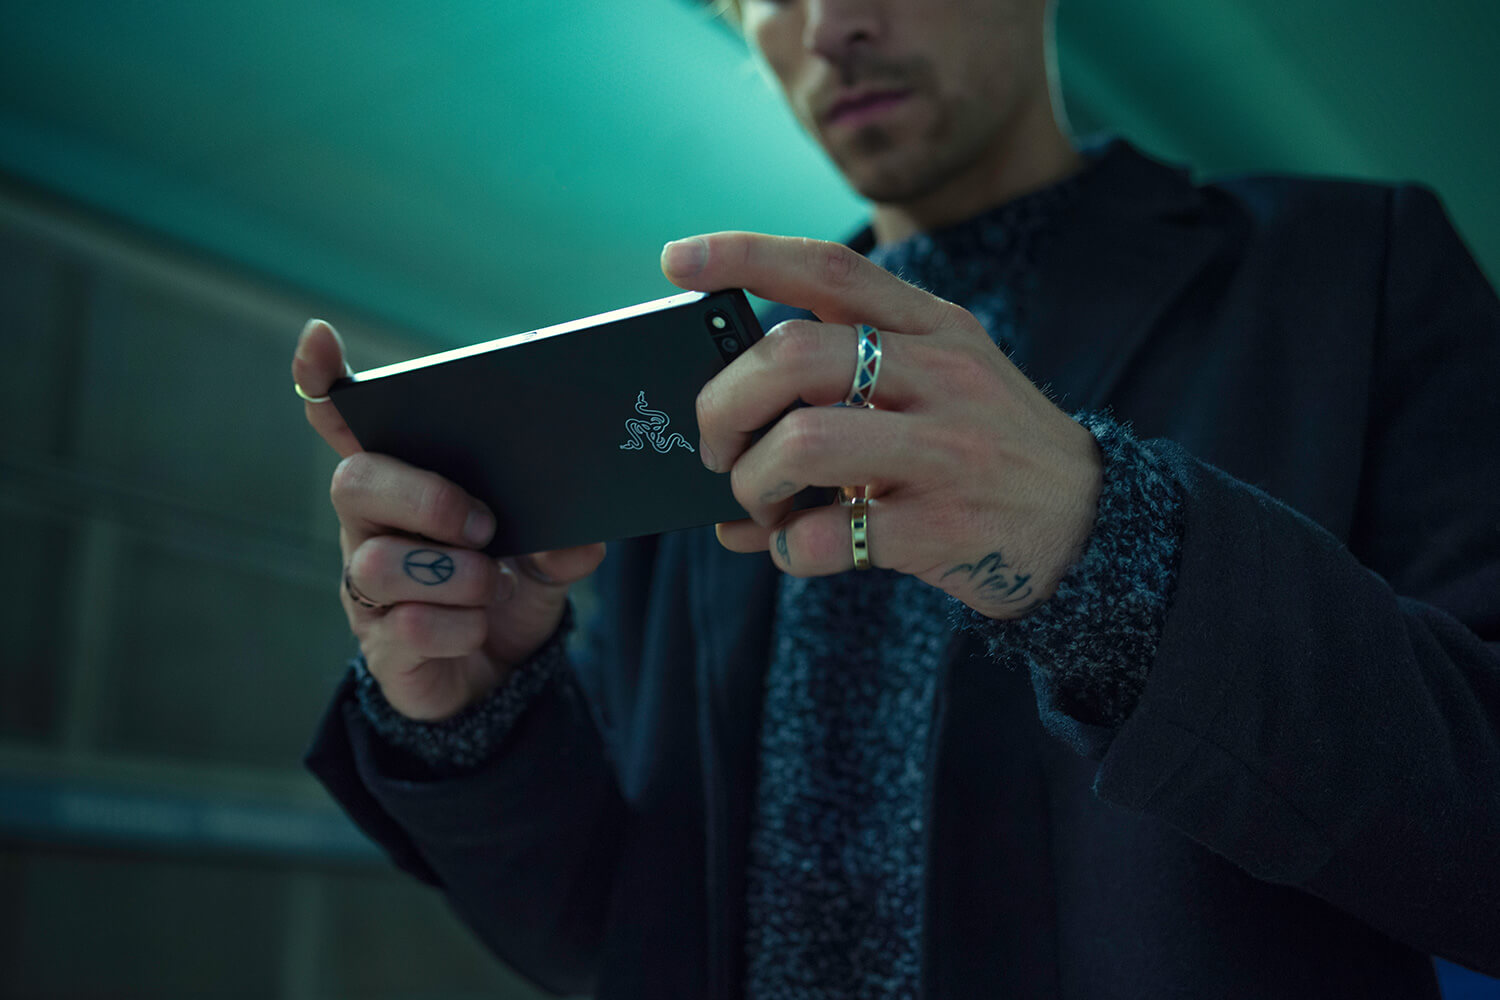 Deal alert: $100 Off for Razer Phone with Promo code 6